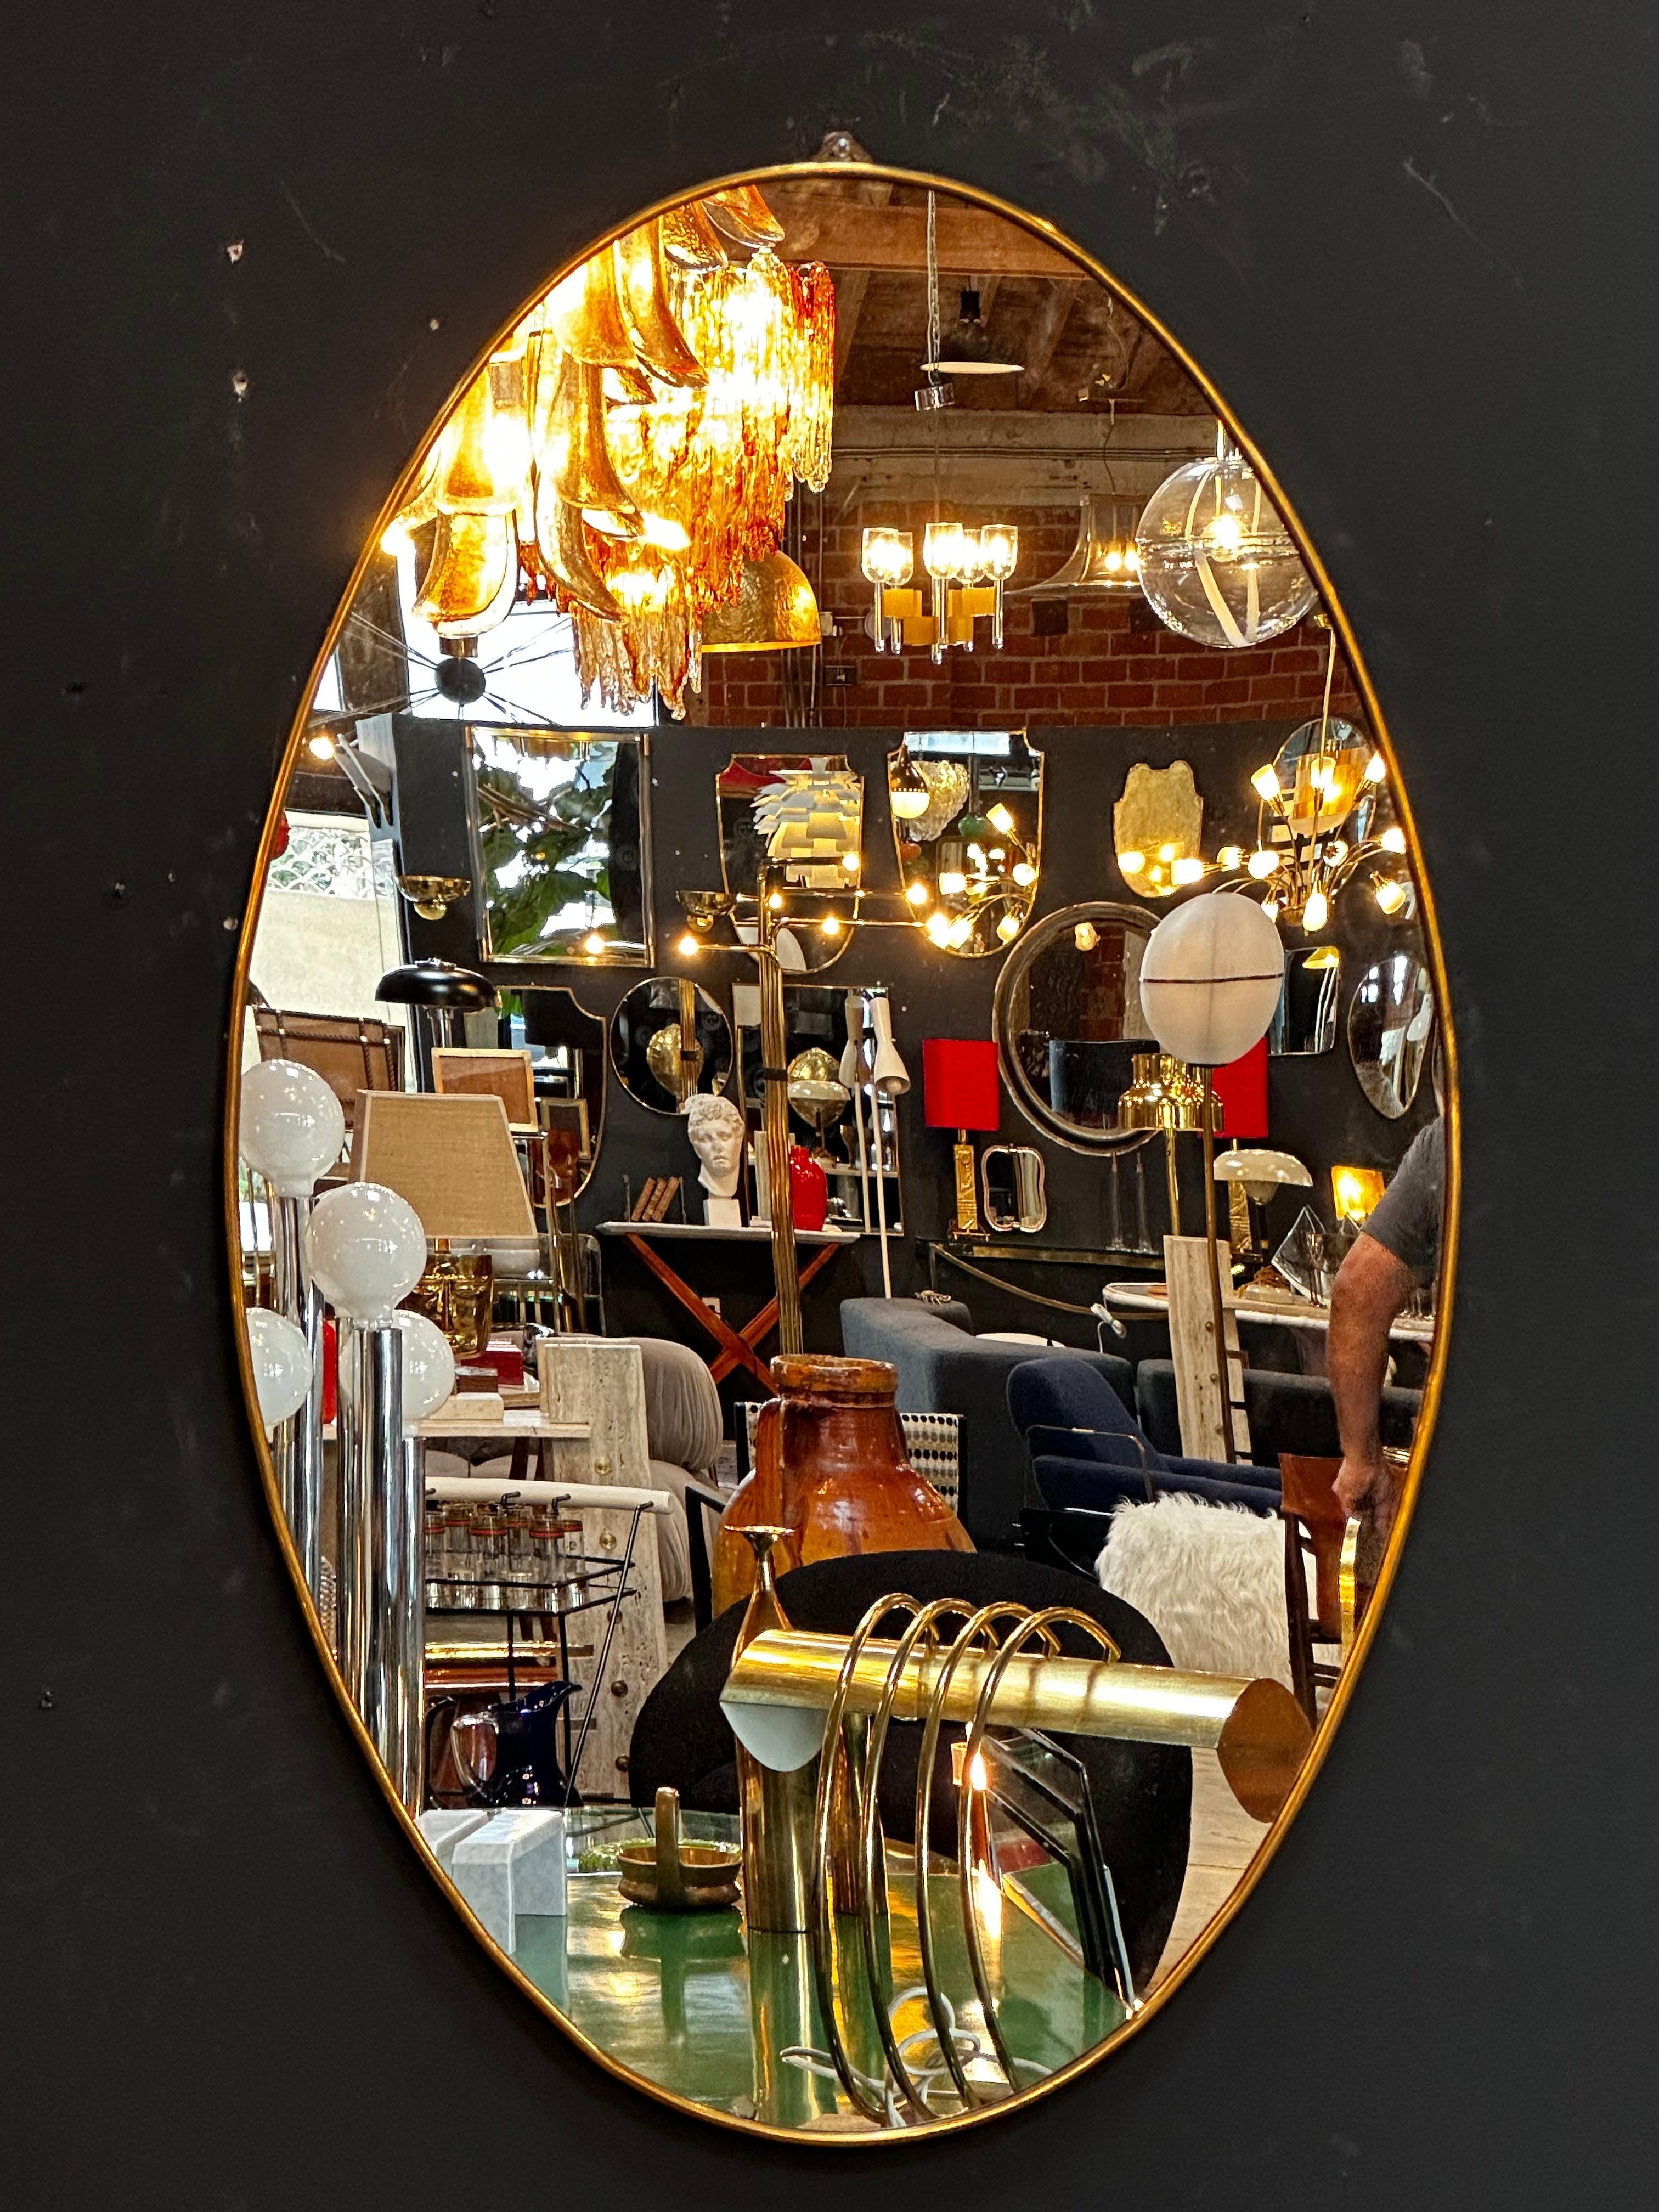 The Vintage Italian 1980 Oval Brass Wall Mirror is a classic and elegant piece with a timeless oval shape and a beautiful brass frame.

